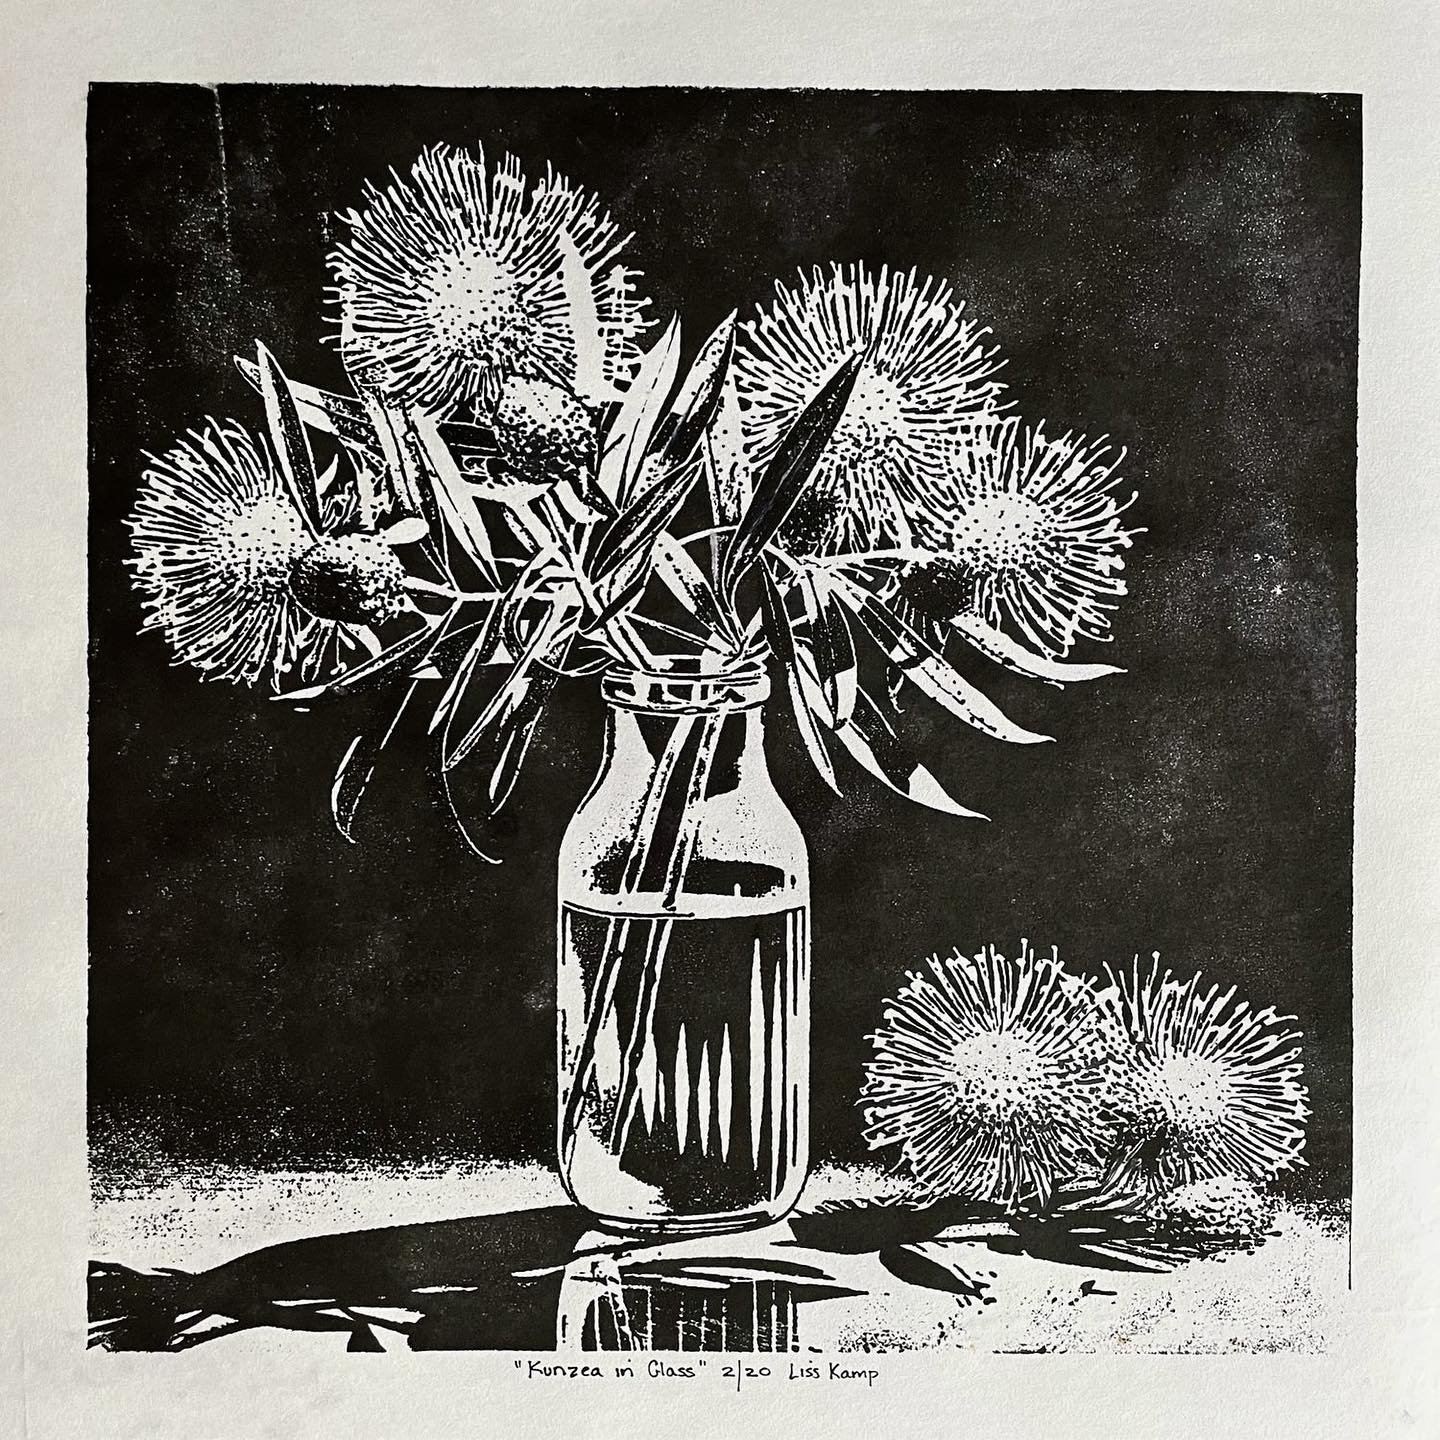 Just realised I never posted the finished work! Kunzea in Glass, 2/20. 

This is a woodcut print on rice paper. It's made by carving the image into a wooden block, inking it, and hand pressing the ink onto the page (with a big kitchen 🥄 spoon, lol).